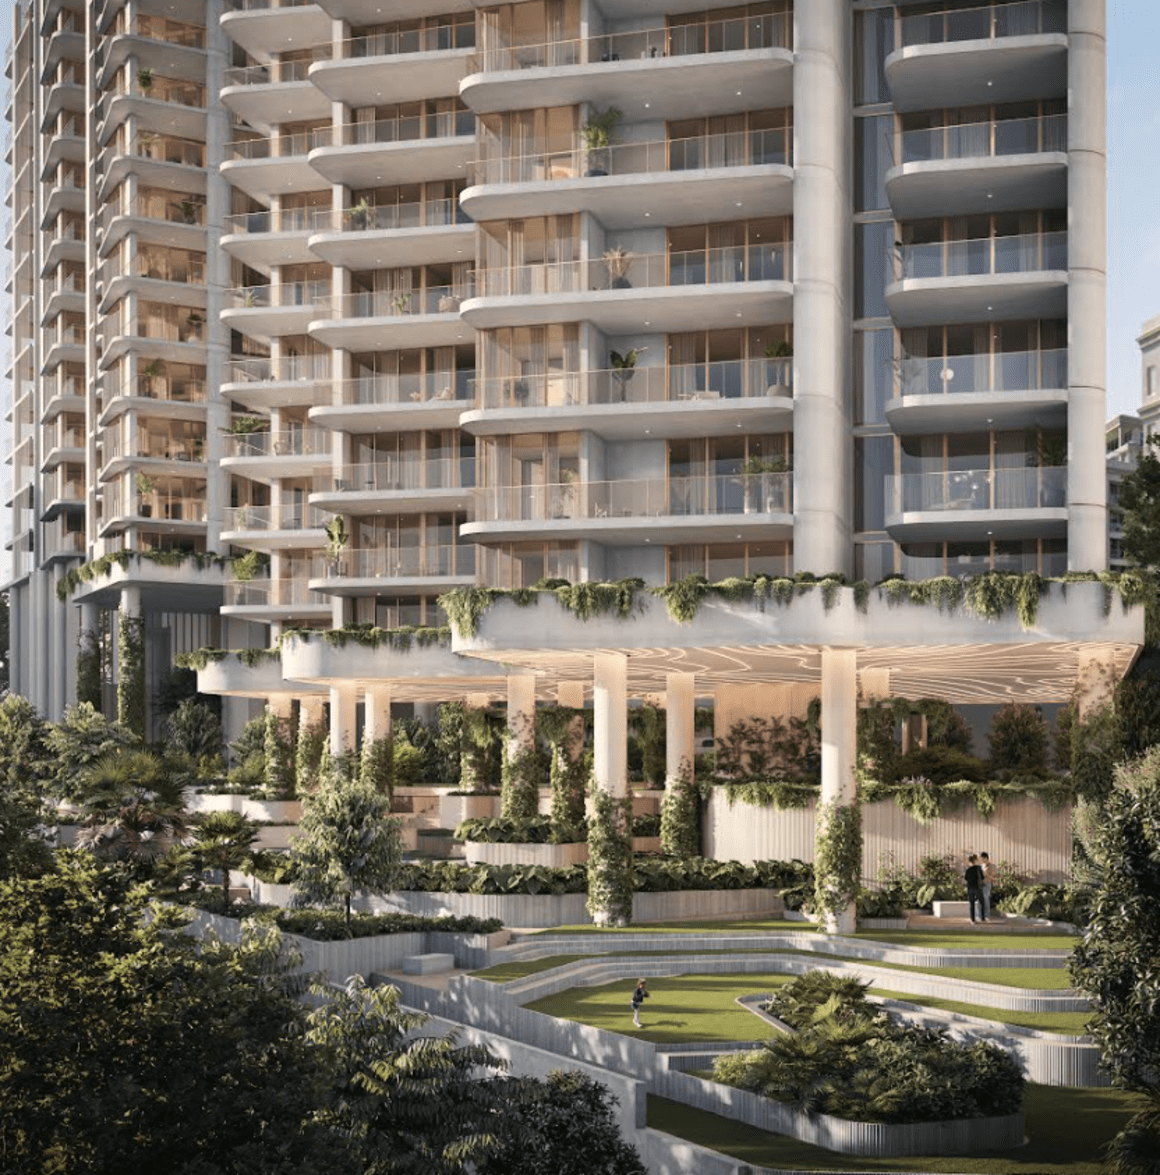 First look: Pikos redesigns Kangaroo Point apartment development, creating one acre of inner-city parkland